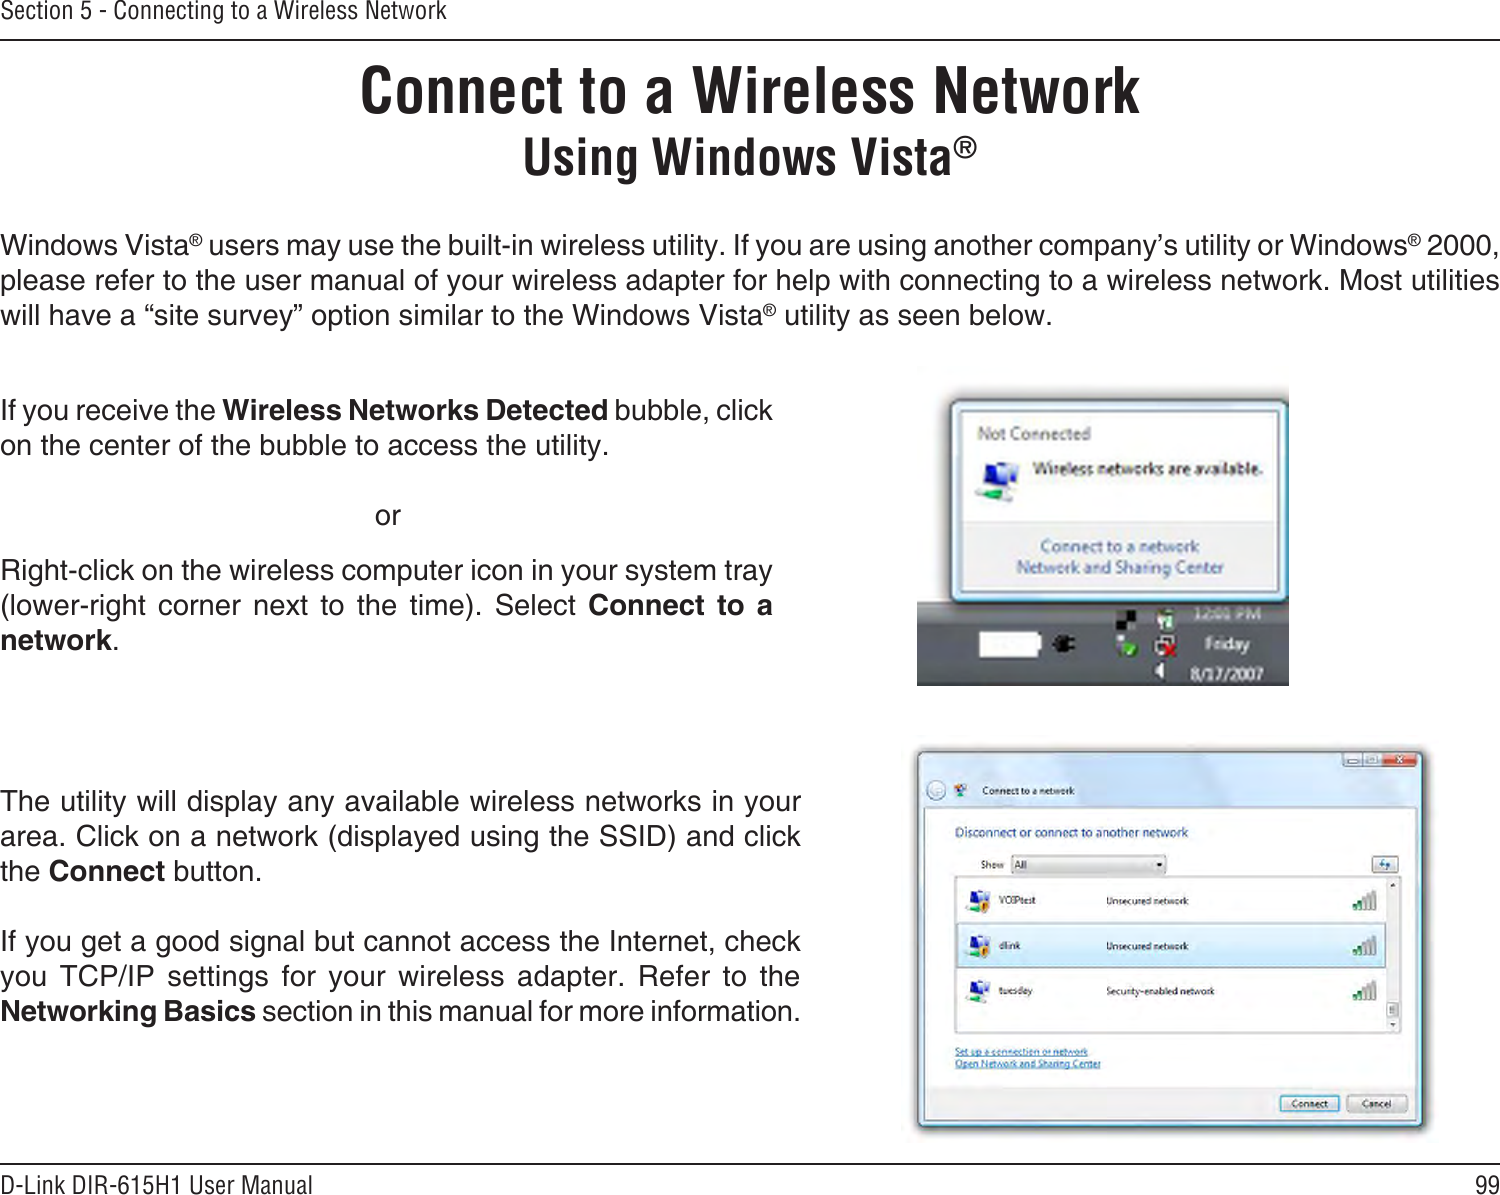 99D-Link DIR-615H1 User ManualSection 5 - Connecting to a Wireless NetworkConnect to a Wireless NetworkWindows Vista® users may use the built-in wireless utility. If you are using another company’s utility or Windows® 2000, please refer to the user manual of your wireless adapter for help with connecting to a wireless network. Most utilities will have a “site survey” option similar to the Windows Vista® utility as seen below.Right-click on the wireless computer icon in your system tray (lower-right  corner  next  to  the  time).  Select  Connect  to  a network.If you receive the Wireless Networks Detected bubble, click on the center of the bubble to access the utility.     orThe utility will display any available wireless networks in your area. Click on a network (displayed using the SSID) and click the Connect button.If you get a good signal but cannot access the Internet, check you  TCP/IP  settings  for  your  wireless  adapter.  Refer  to  the Networking Basics section in this manual for more information.Using Windows Vista®